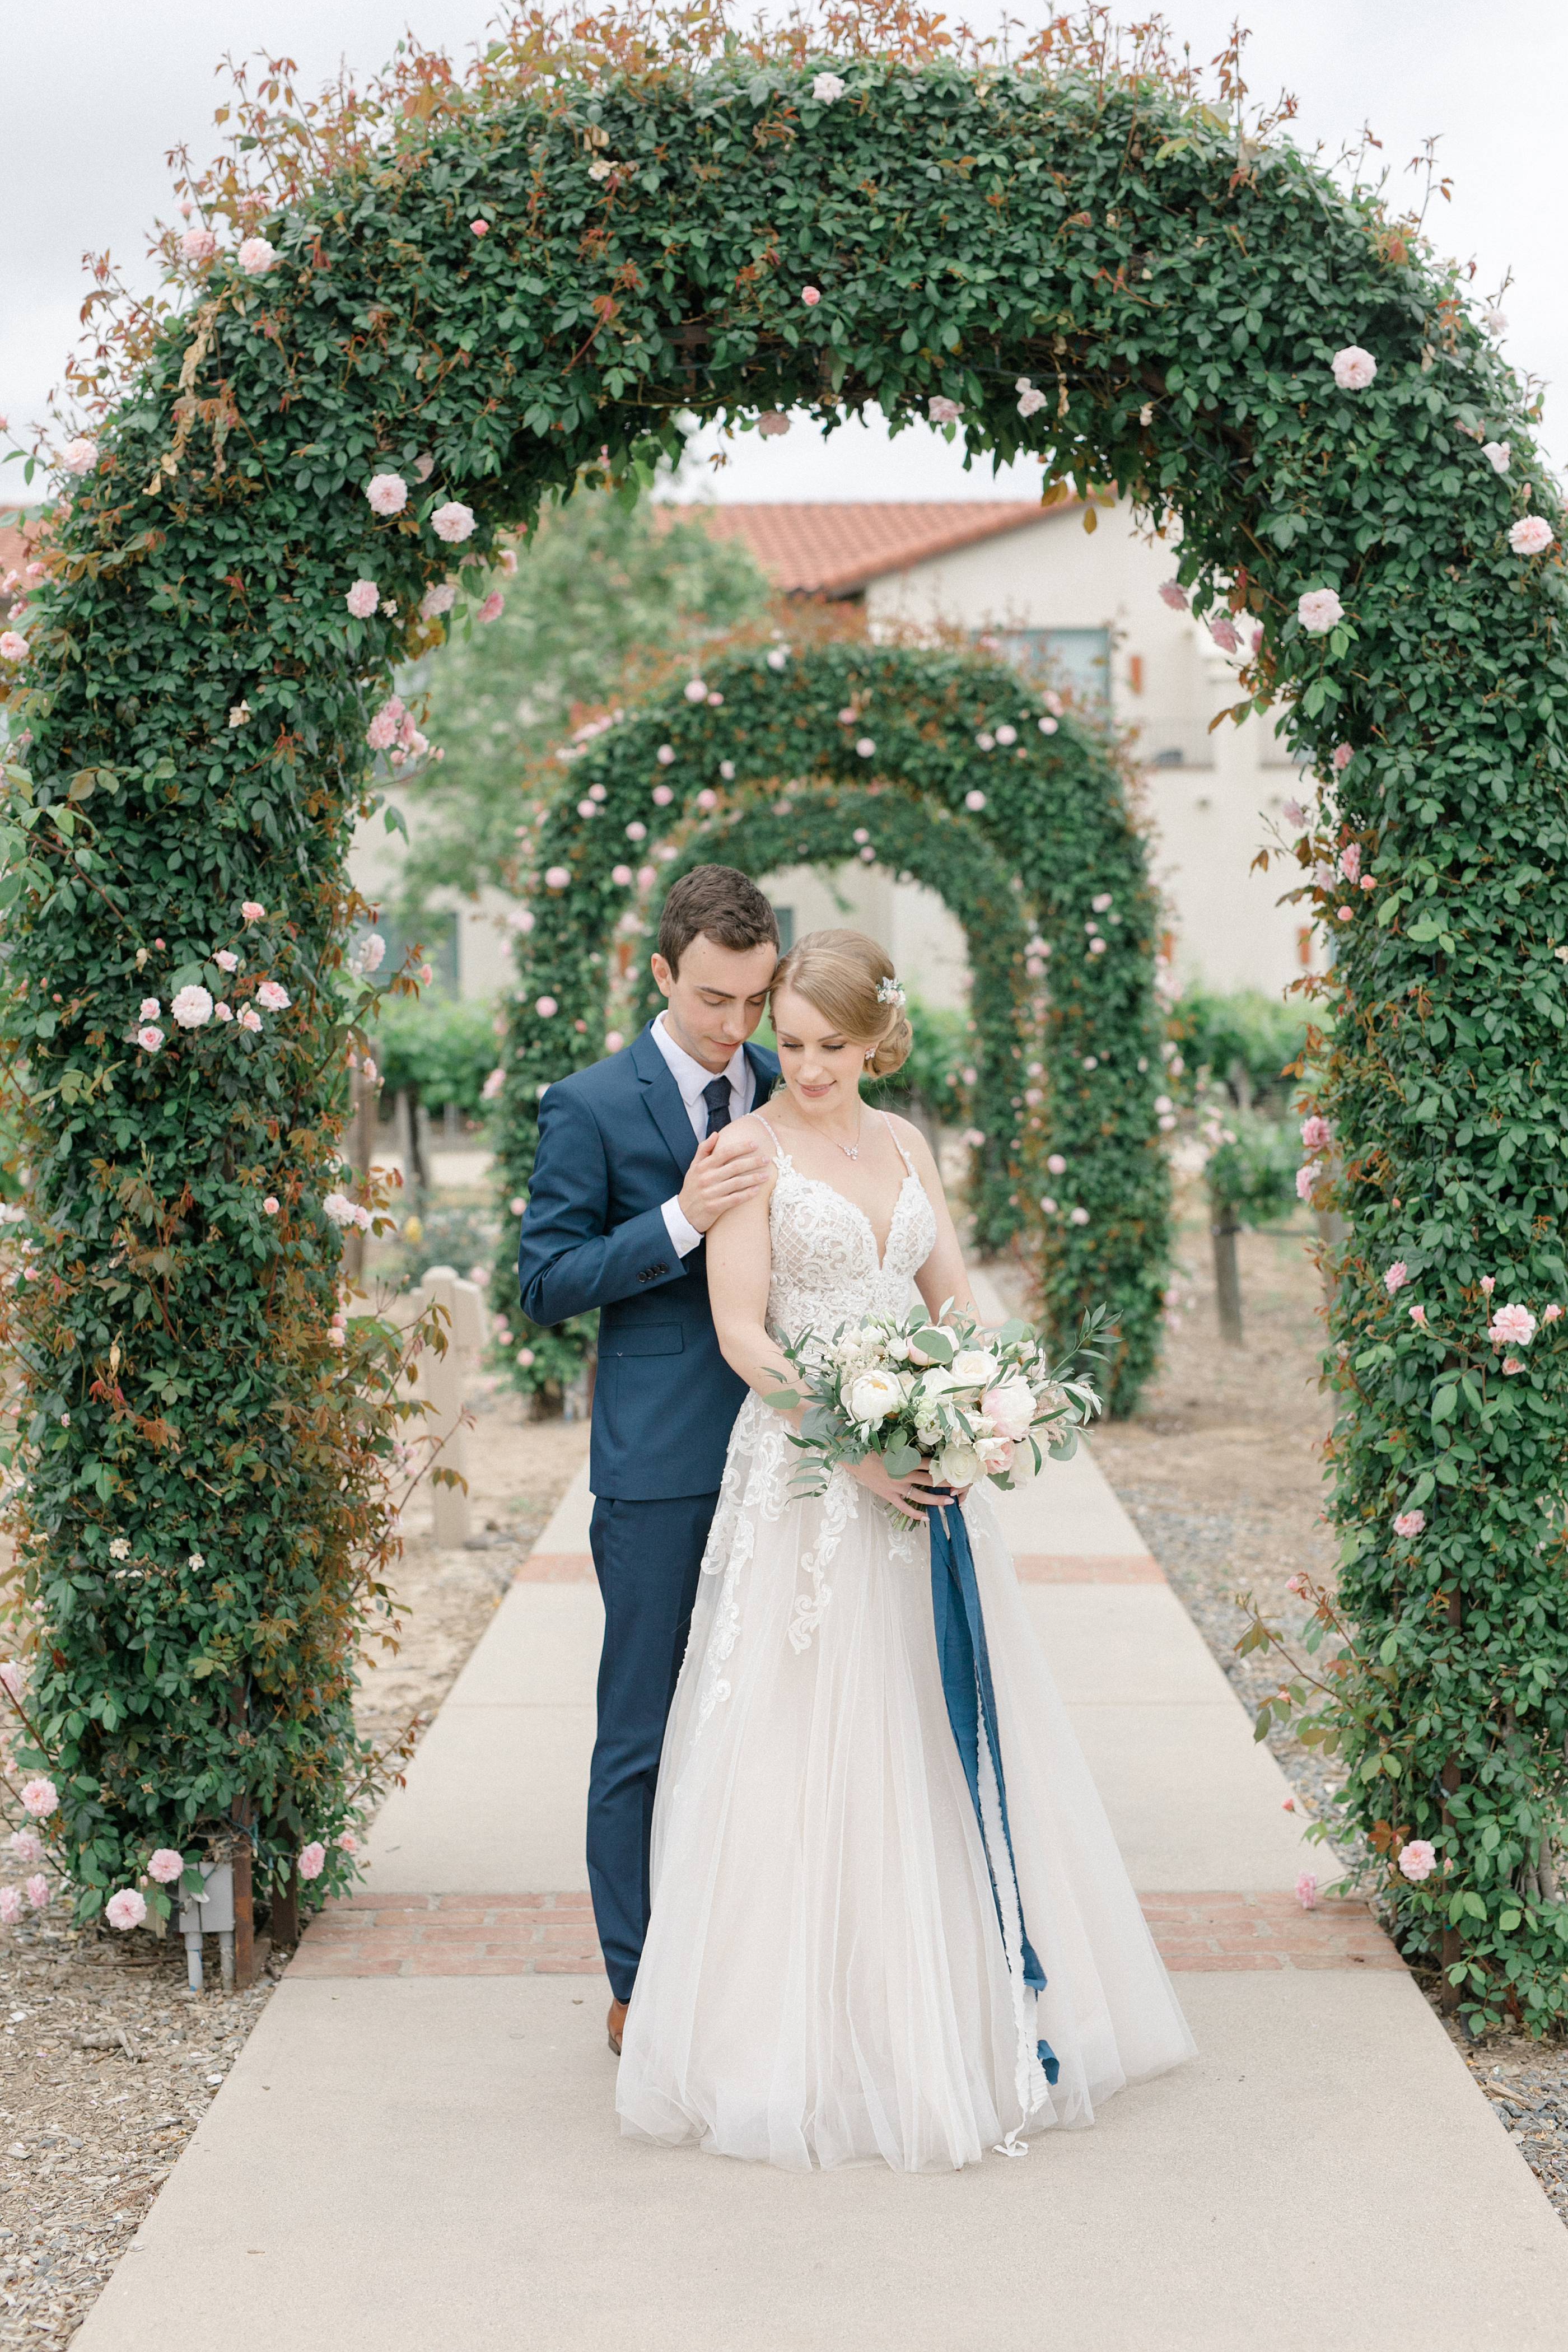 Bride and groom together for garden style winery wedding at Ponte Winery in Temecula California captured by Carrie Mcguire Photography